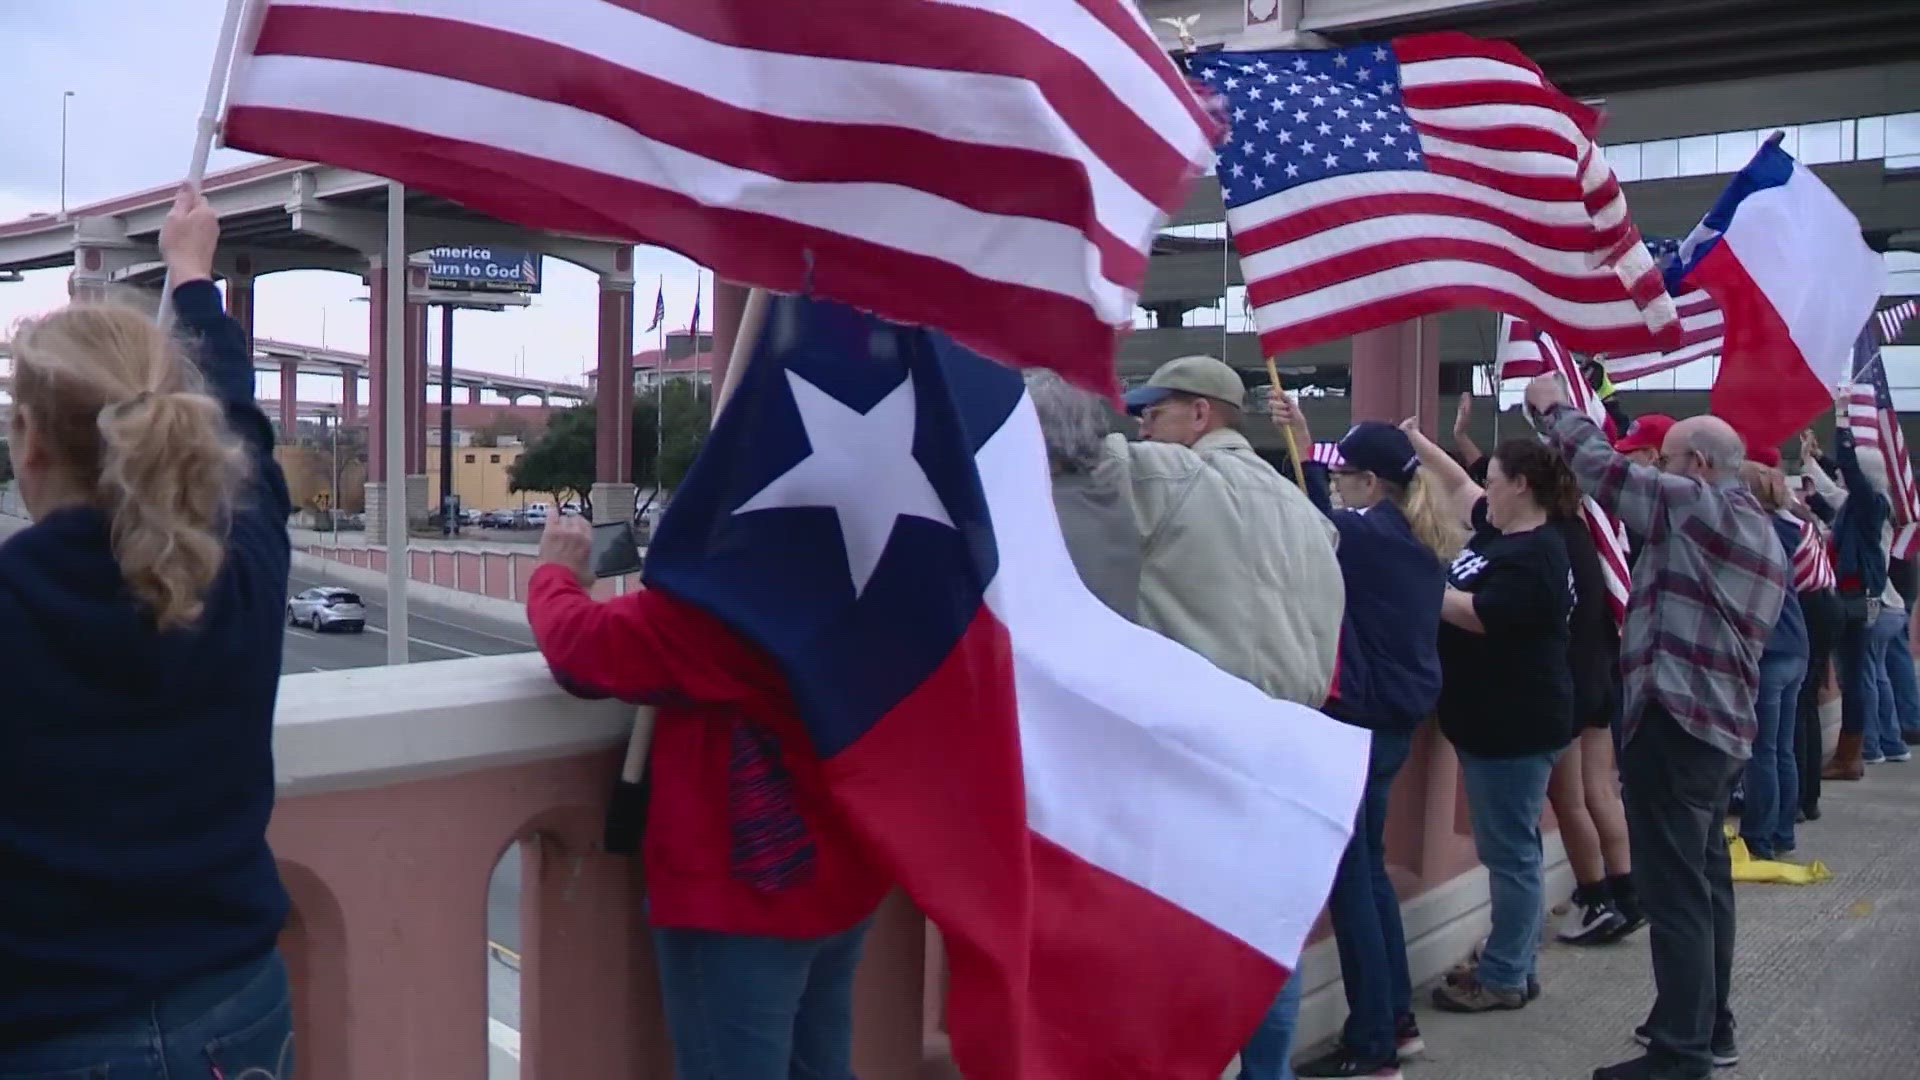 Protesters in San Antonio cheering on Convoy that continues towards Eagle Pass this weekend